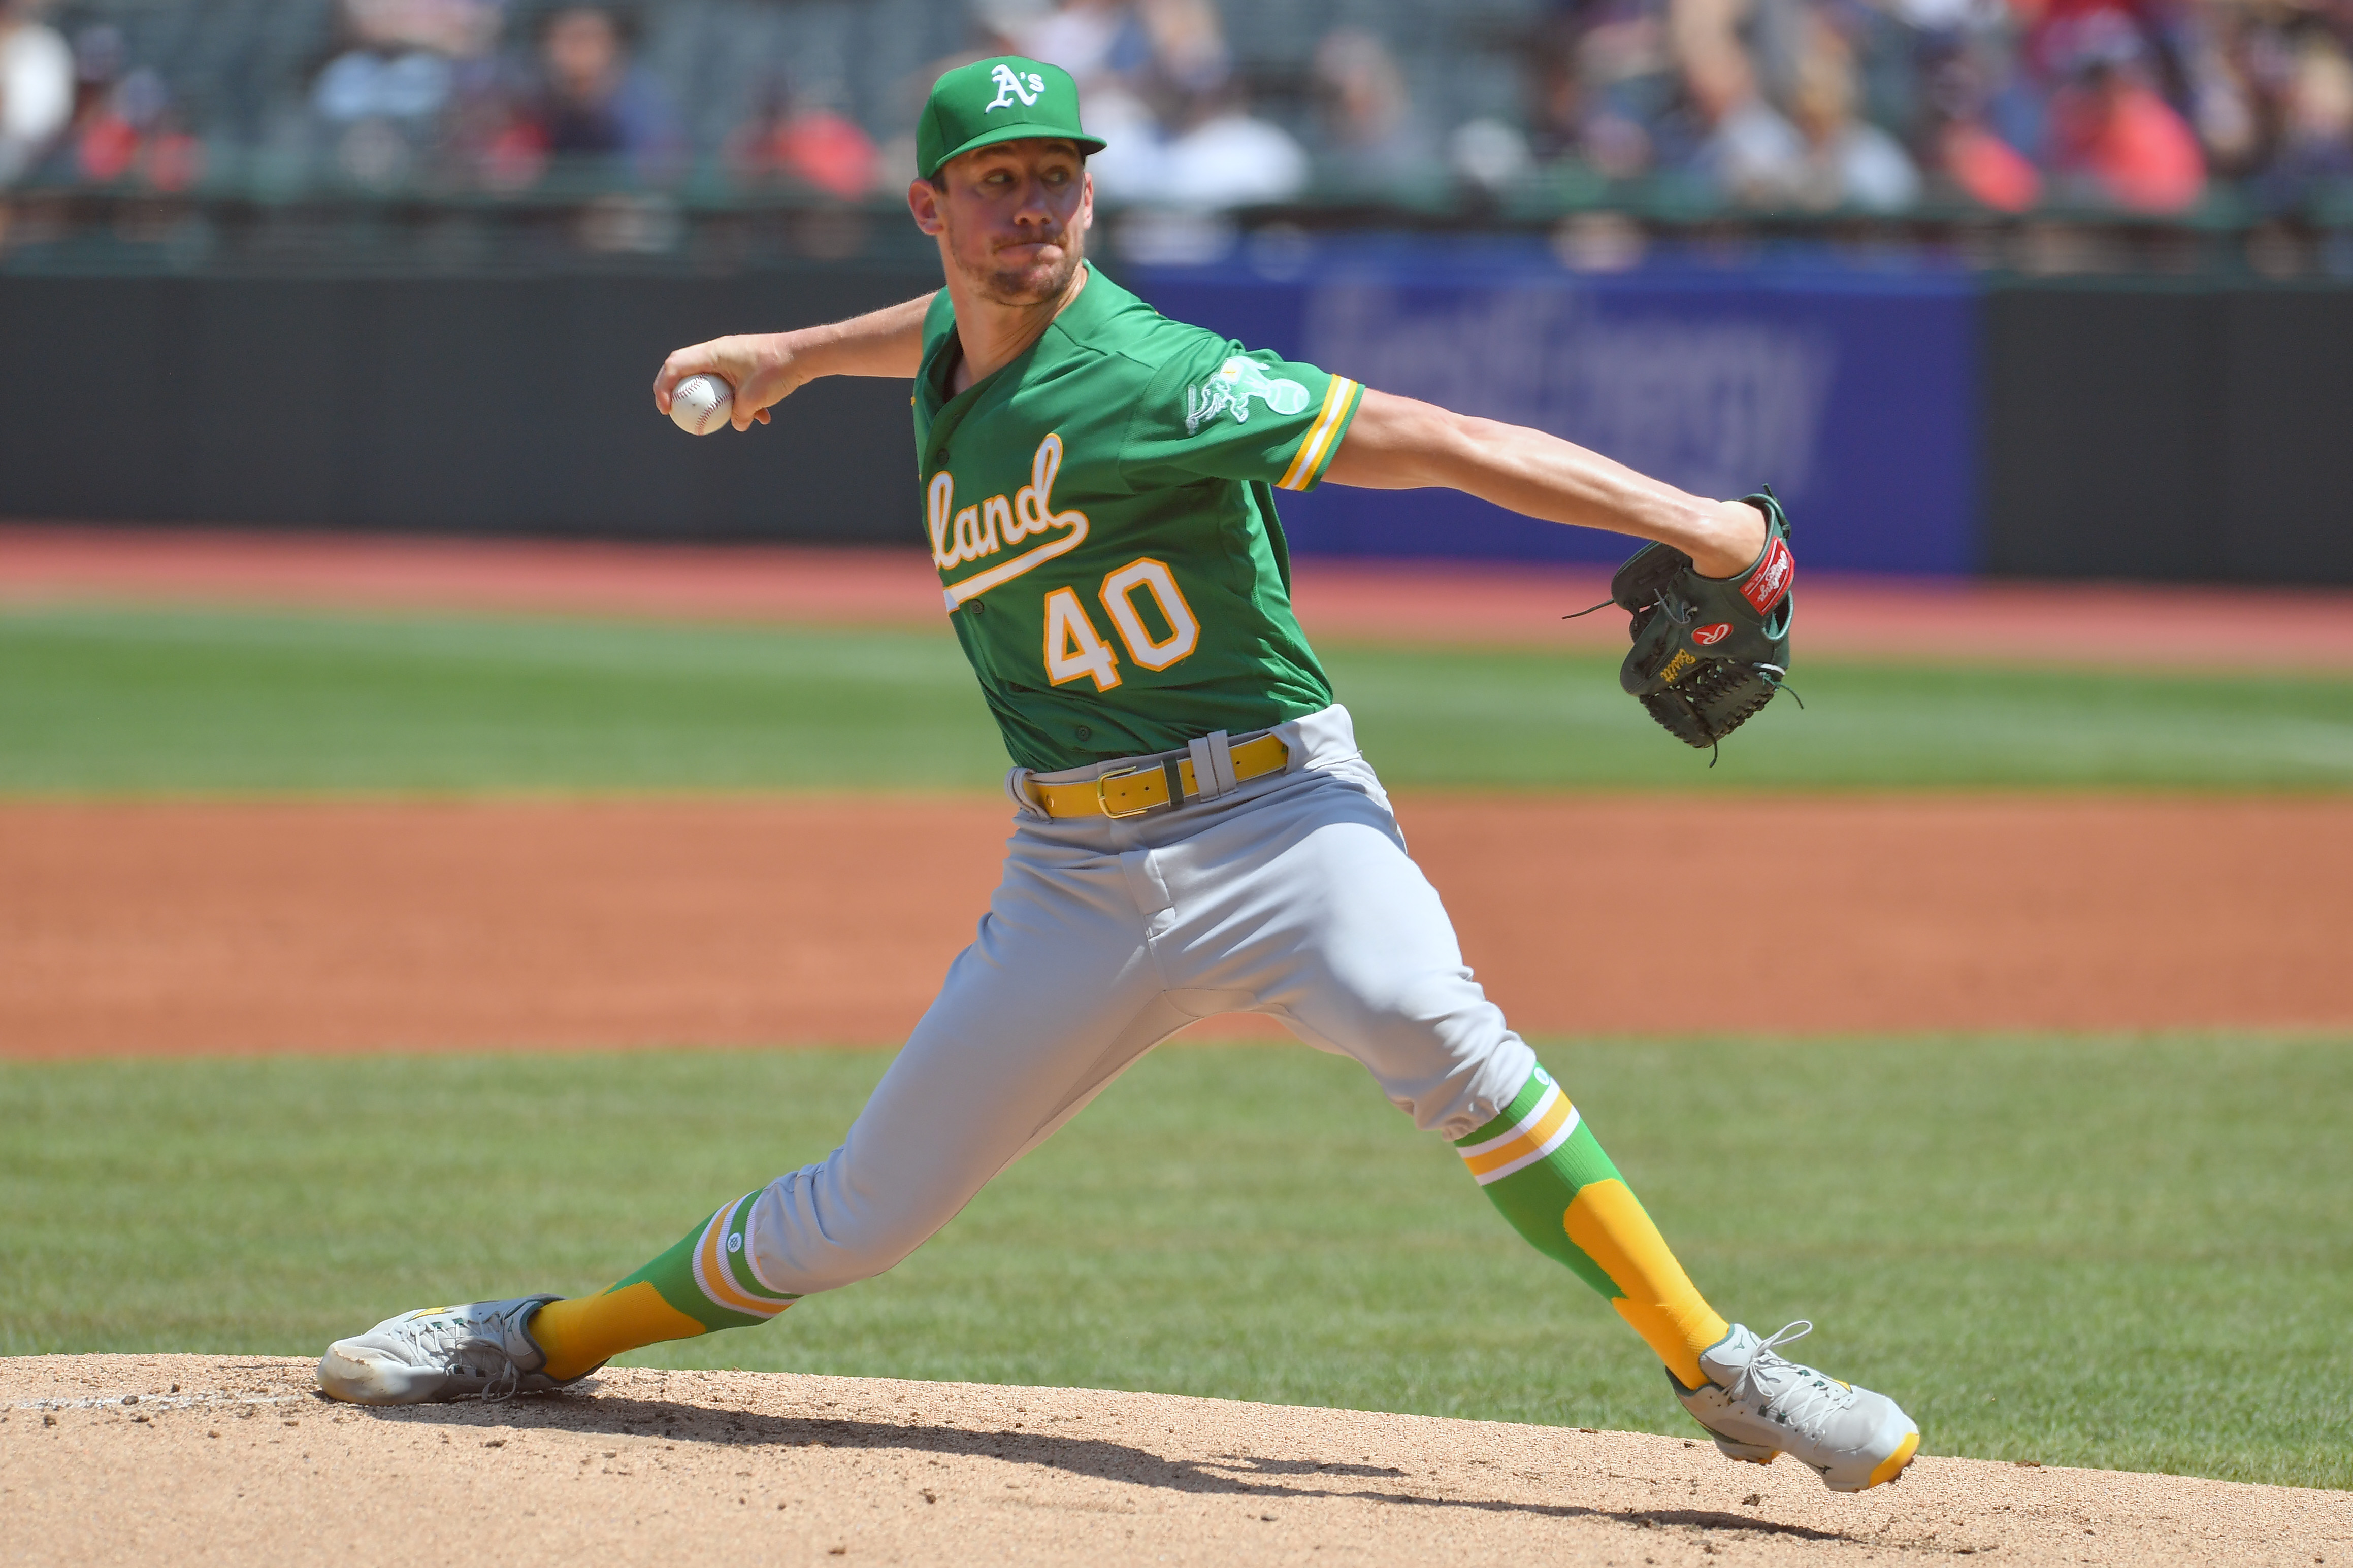 Chris Bassitt eager to pitch again following surgery